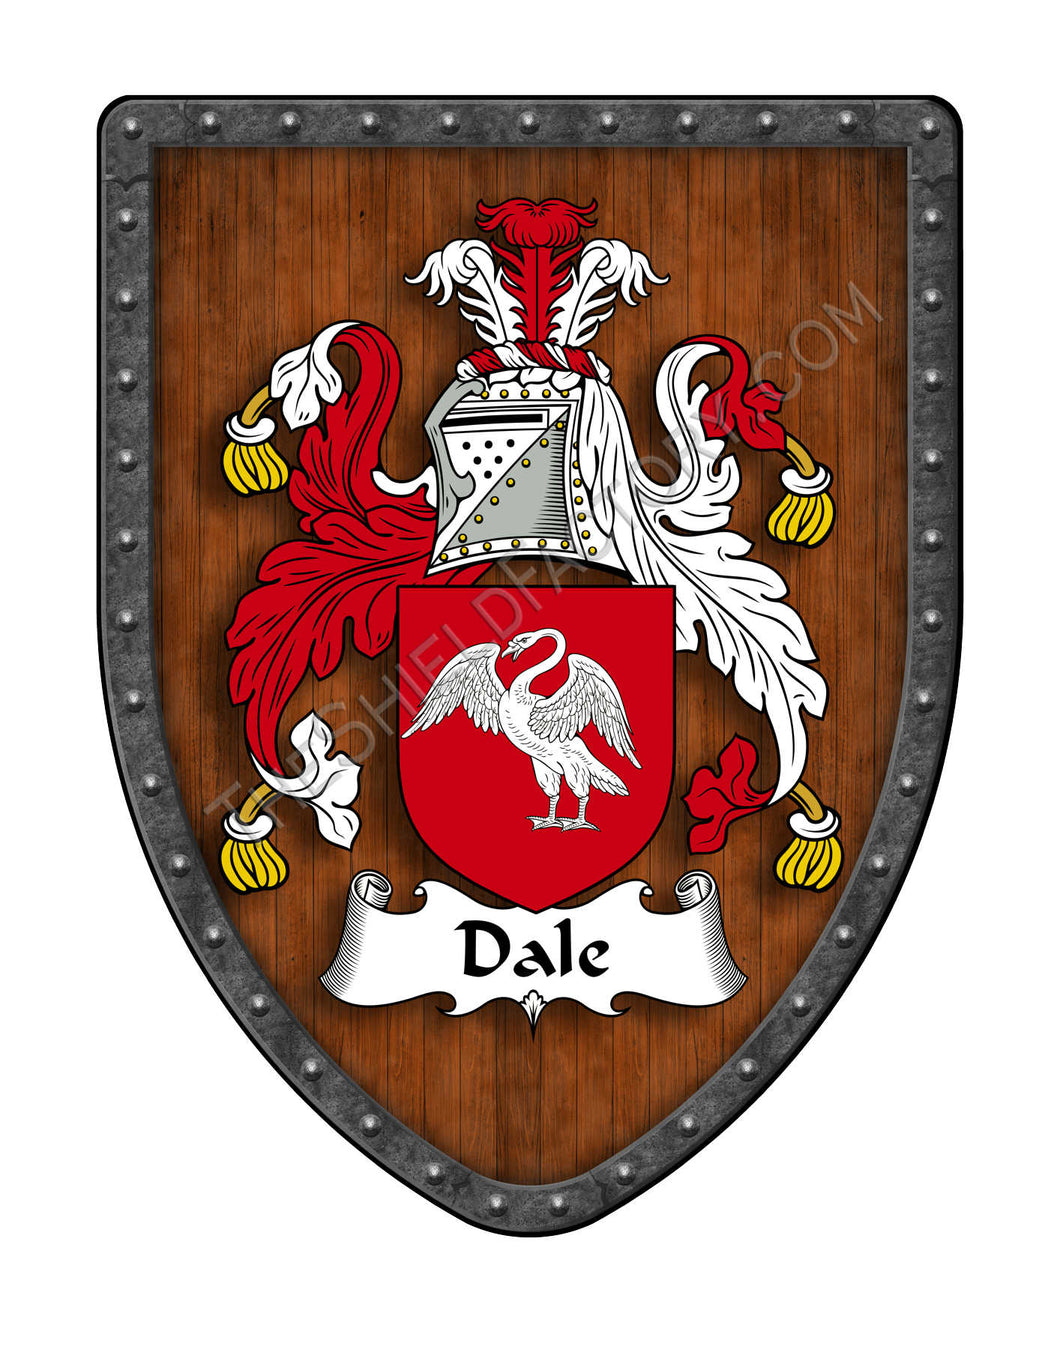 Dale Coat of Arms Shield Family Crest